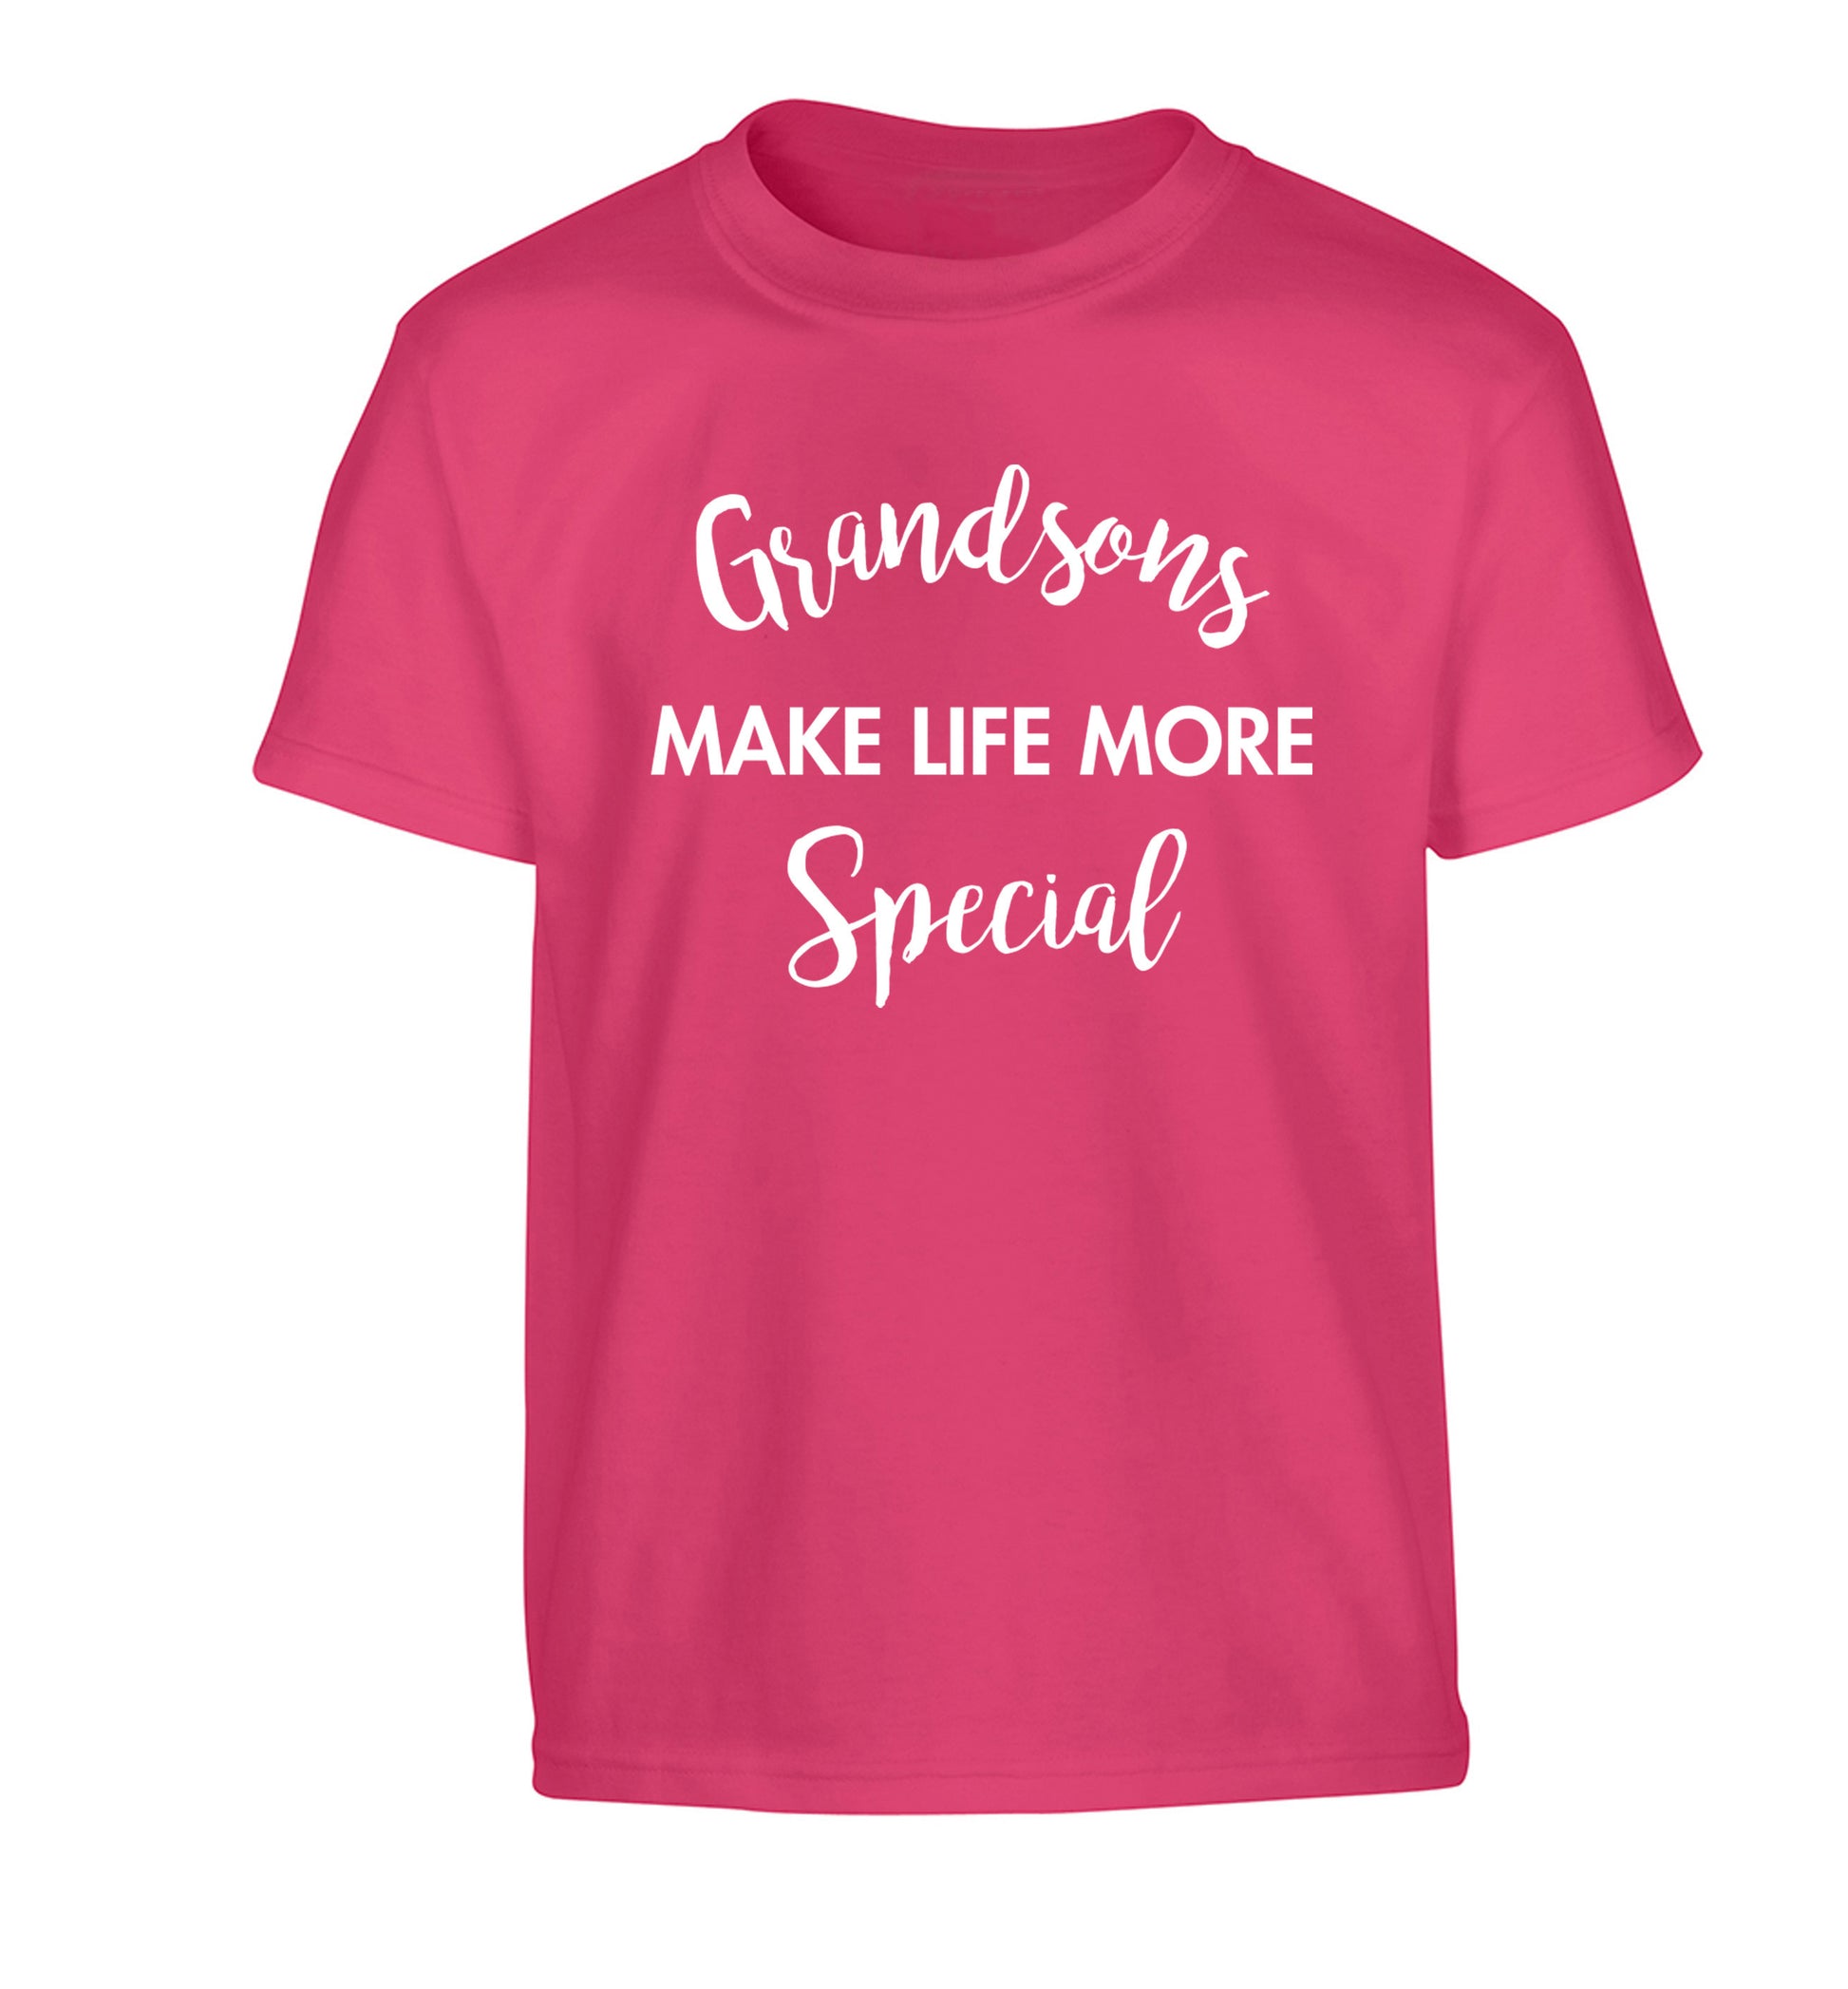 Grandsons make life more special Children's pink Tshirt 12-14 Years